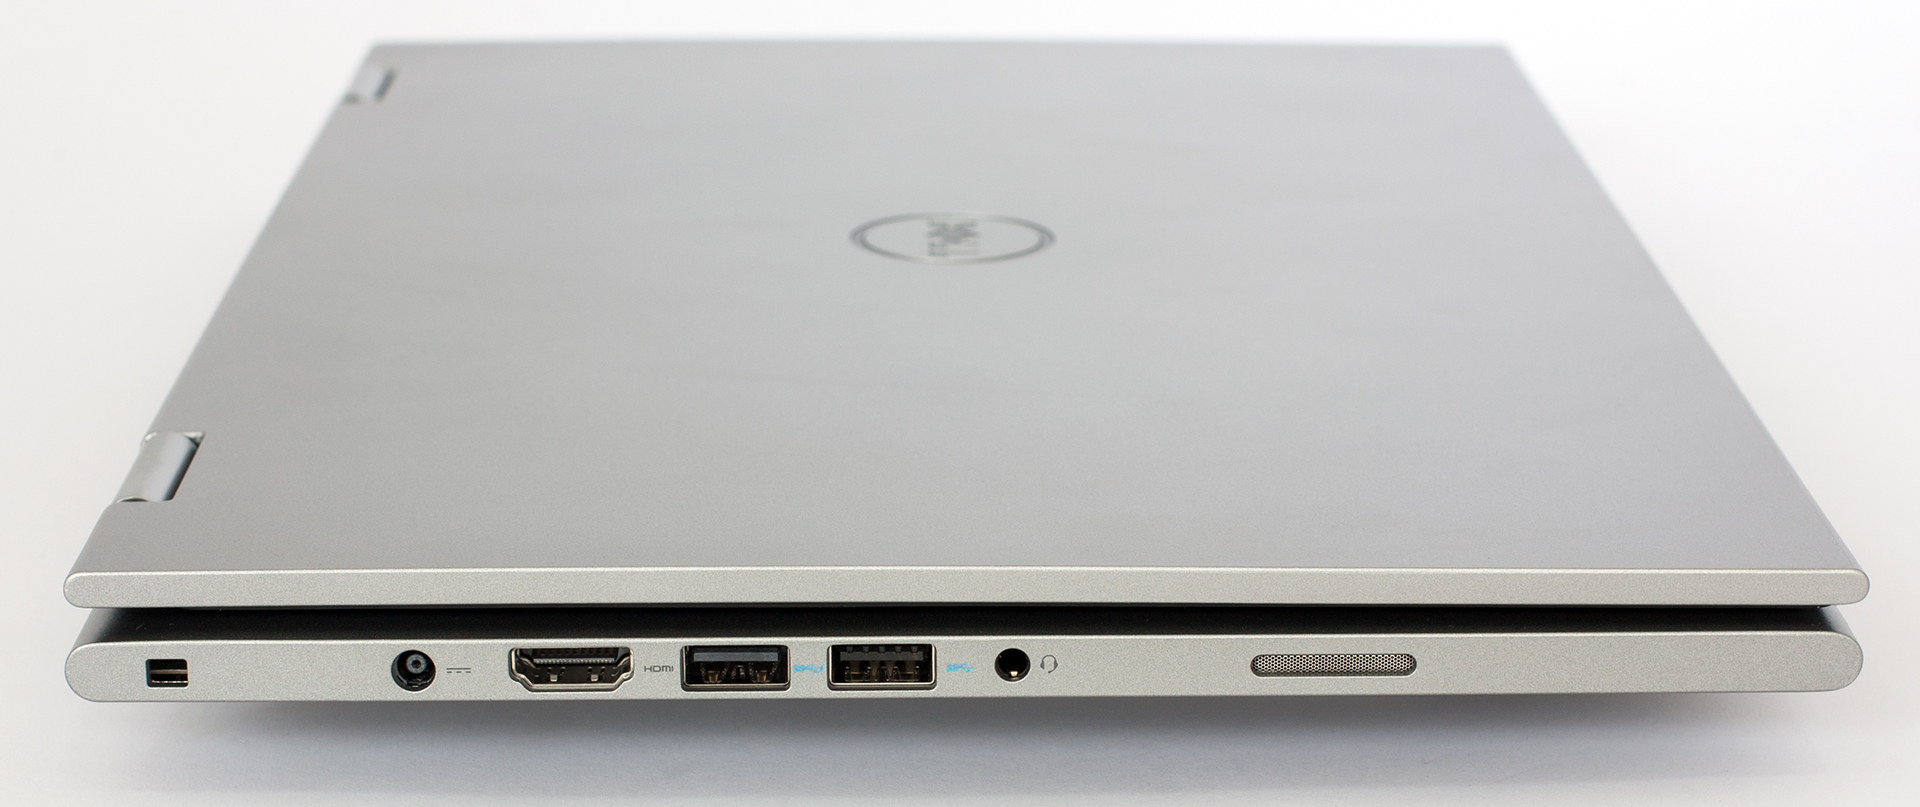 dell inspiron 13 7359 review